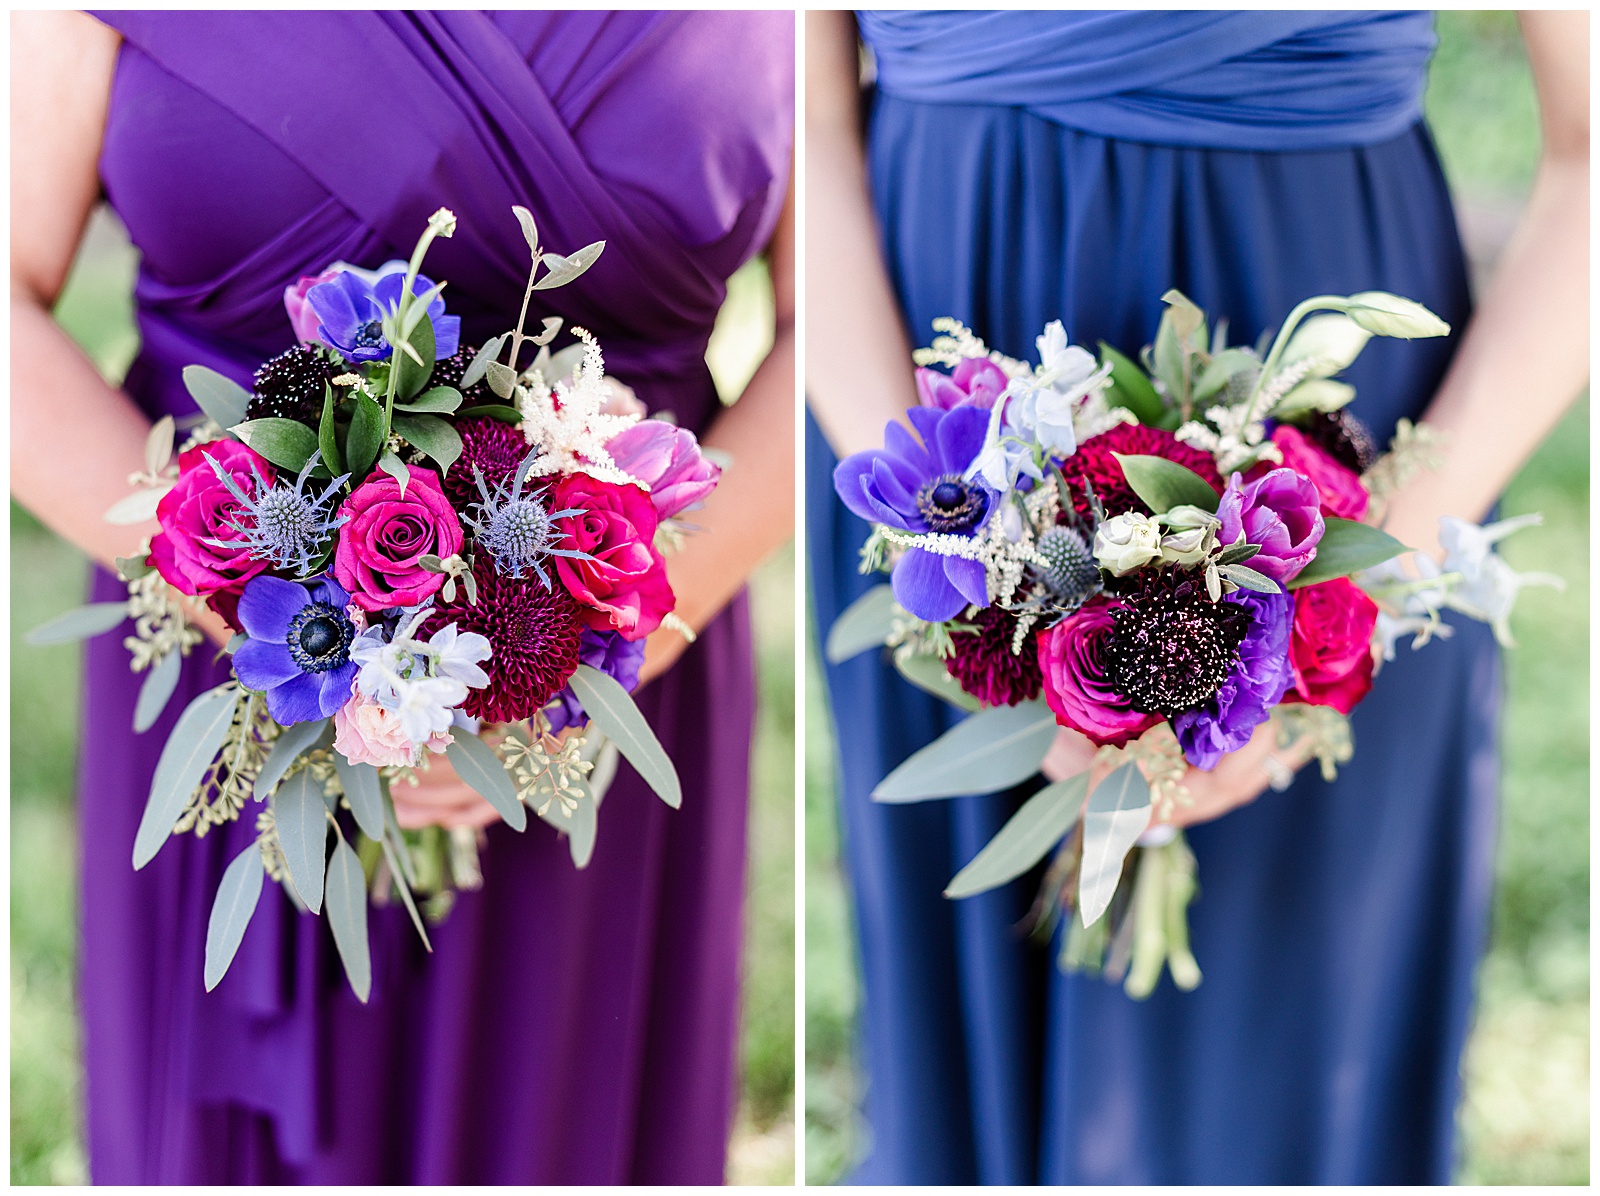 💍 bold purple and blue color bridesmaid dresses and pink and purple bouquet detail shot 👰 Bride: lace wedding dress with rhinestone belt rhinestone barrette in hair down with pearls 💍 Bright Colorful Summer City Wedding in Charlotte, NC with Taryn and Ryan | Kevyn Dixon Photography